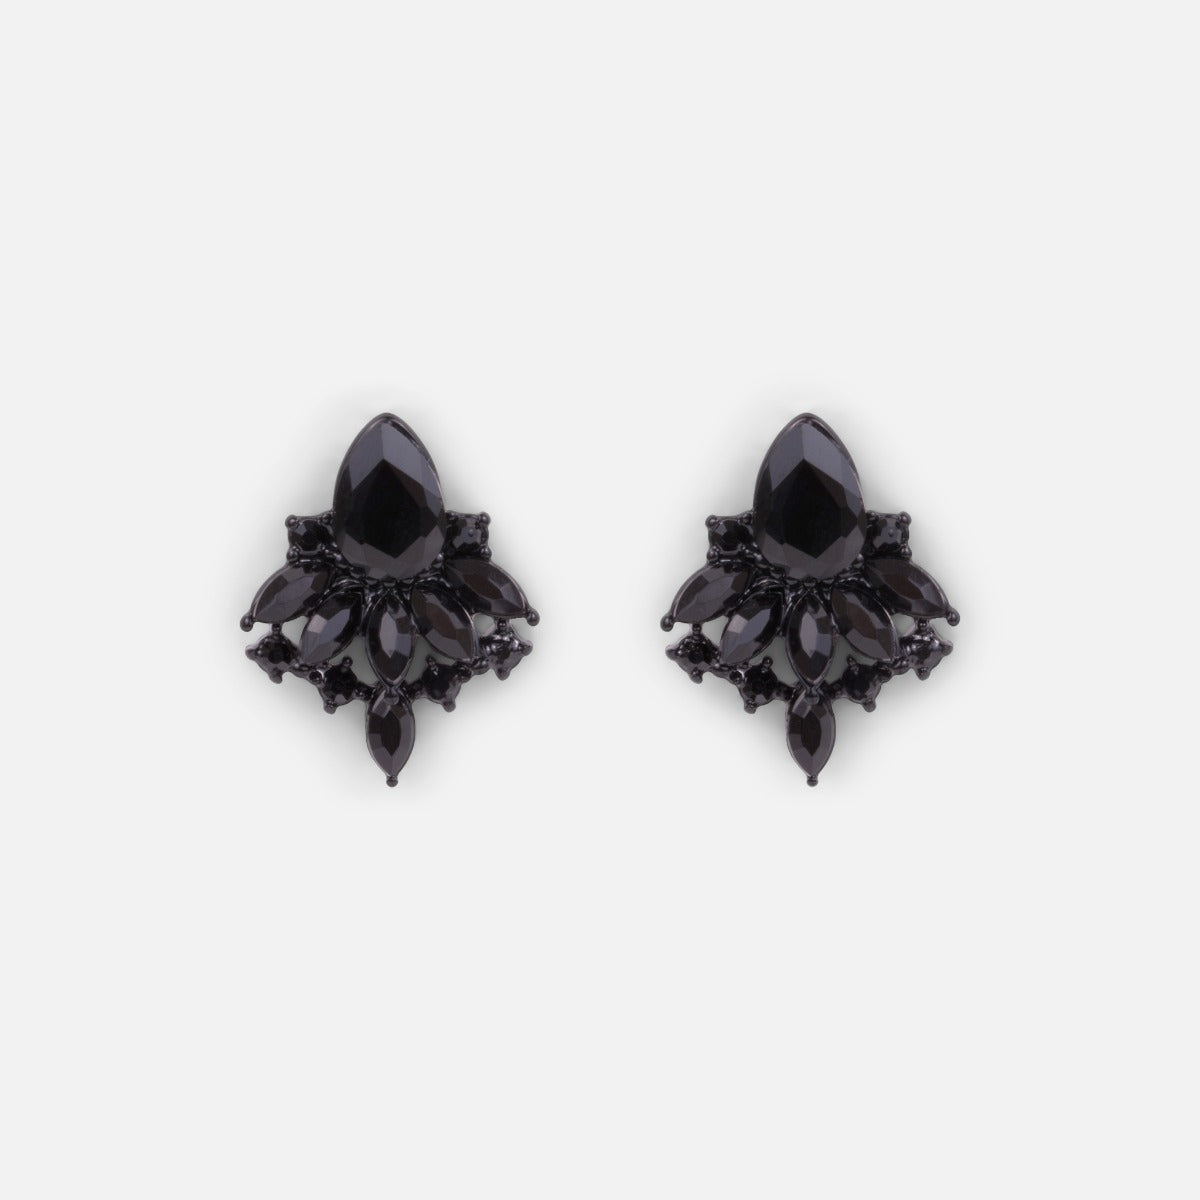 Abstract shape earrings with black stones